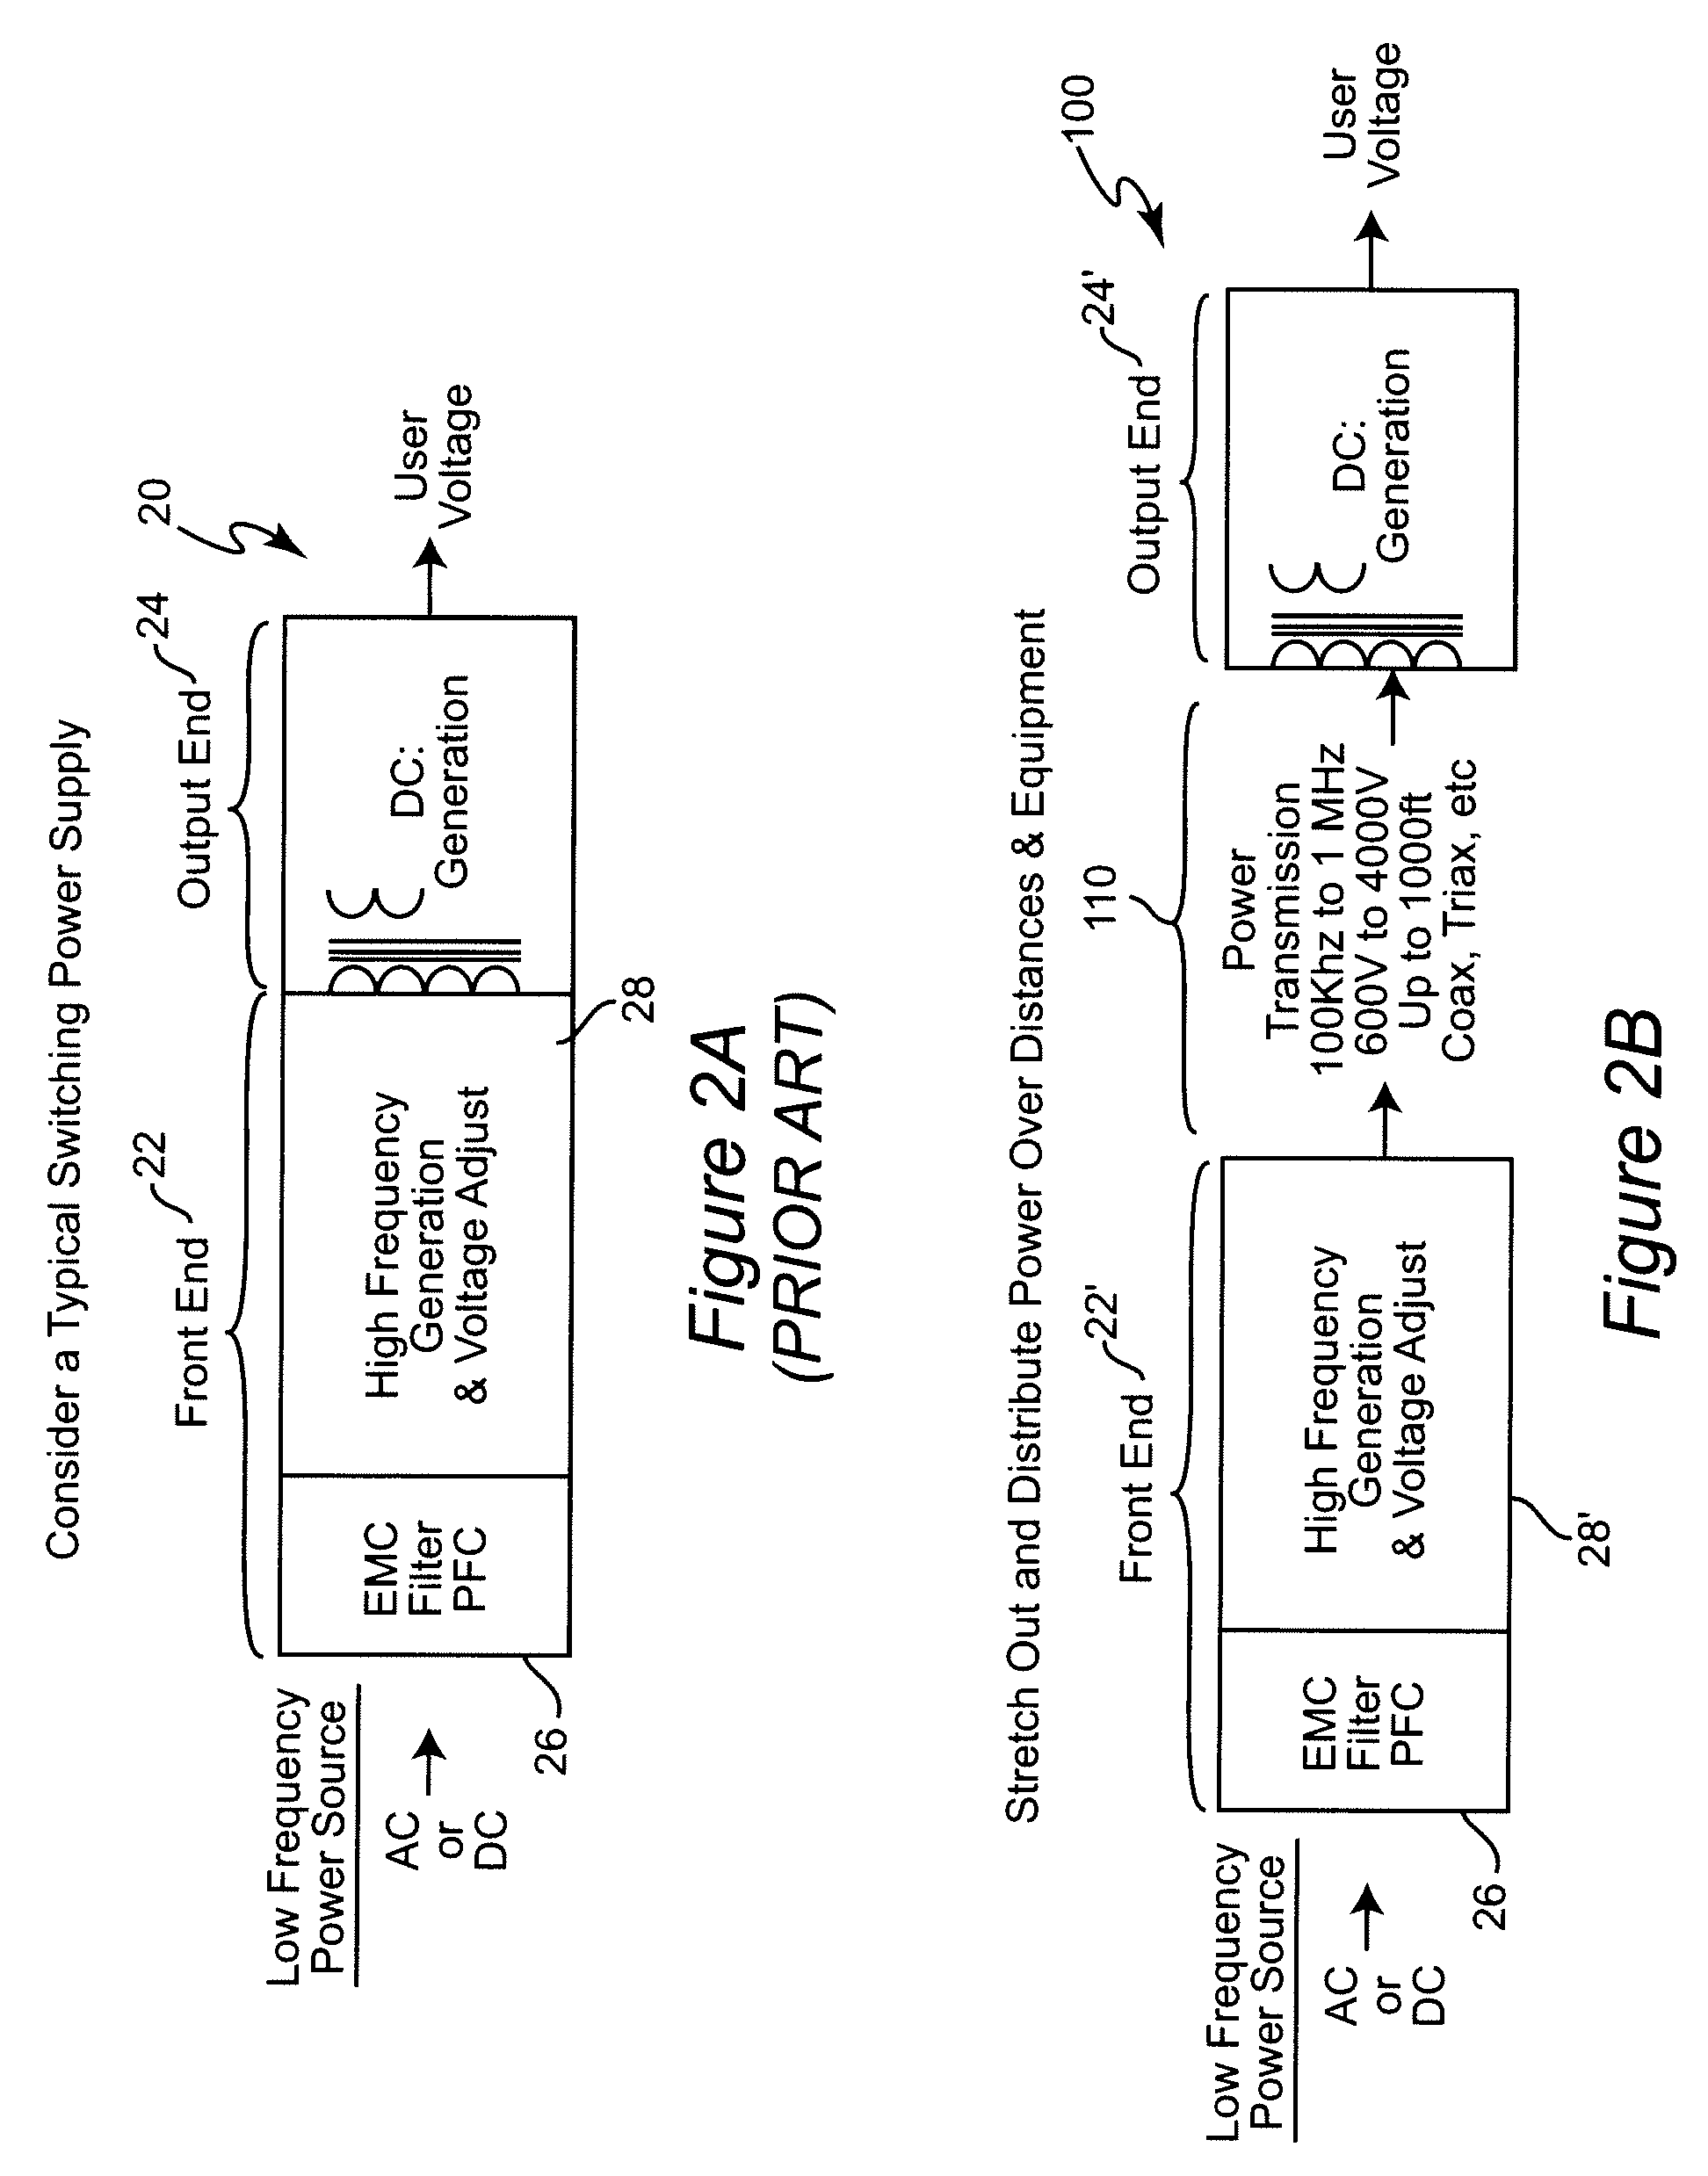 High Voltage and Frequency Distributed Power System